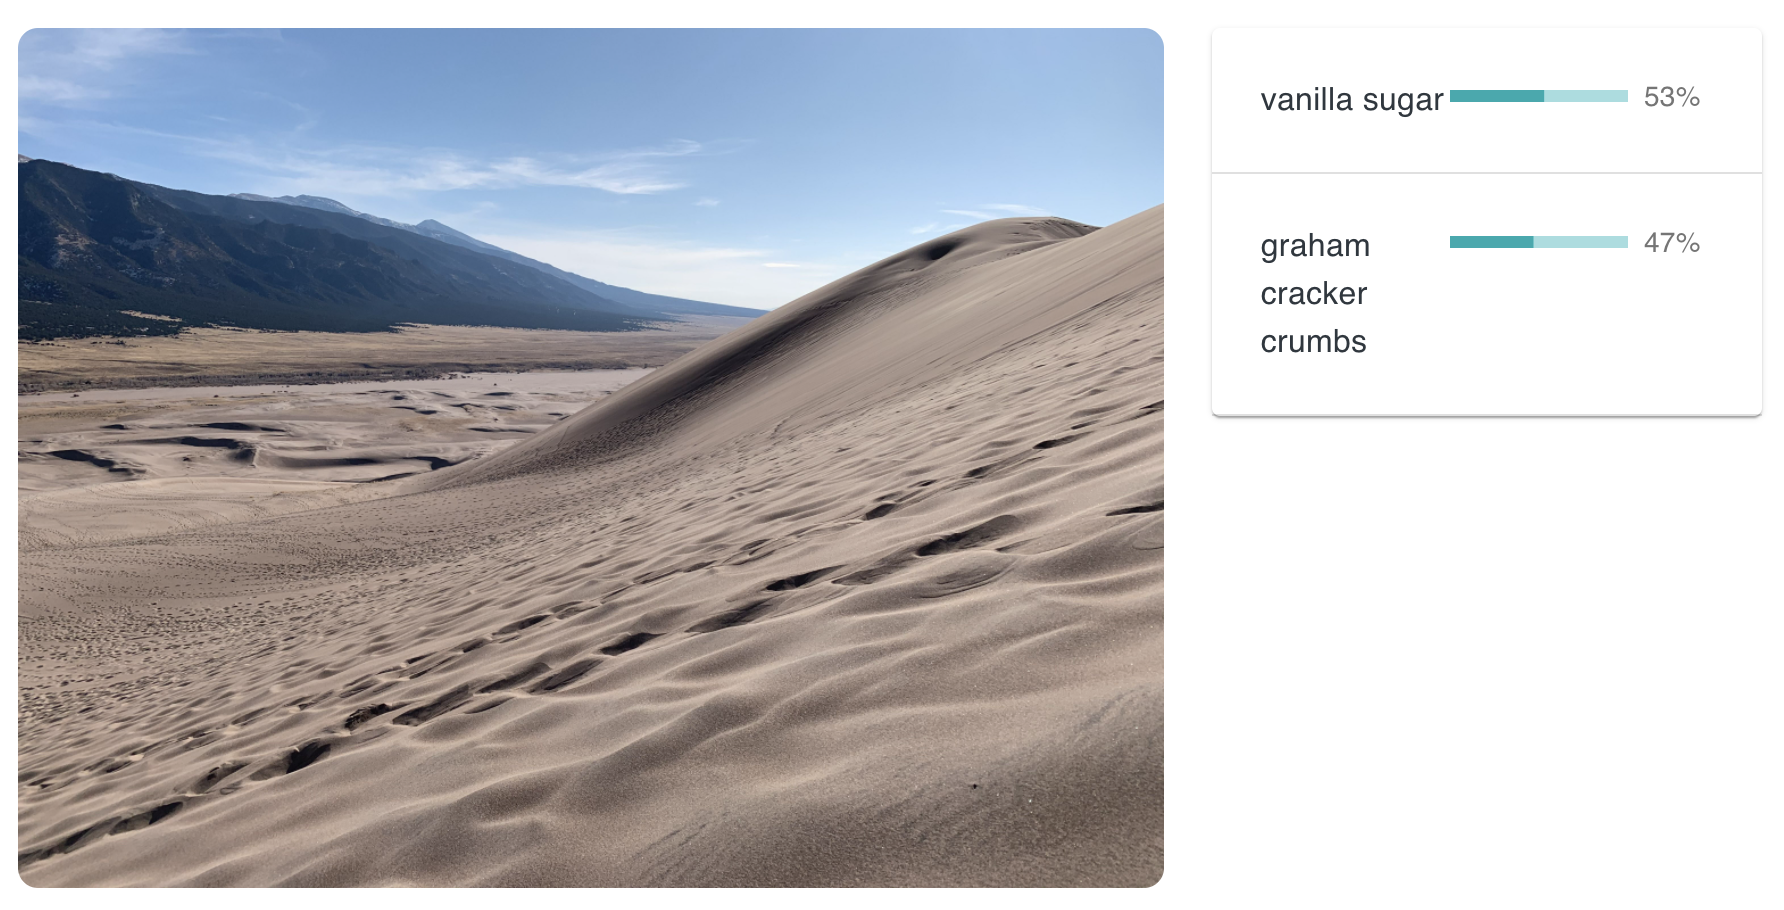 Photo of the Great Sand Dunes. AI’s rated it as vanilla sugar: 53%; graham cracker crumbs: 47%